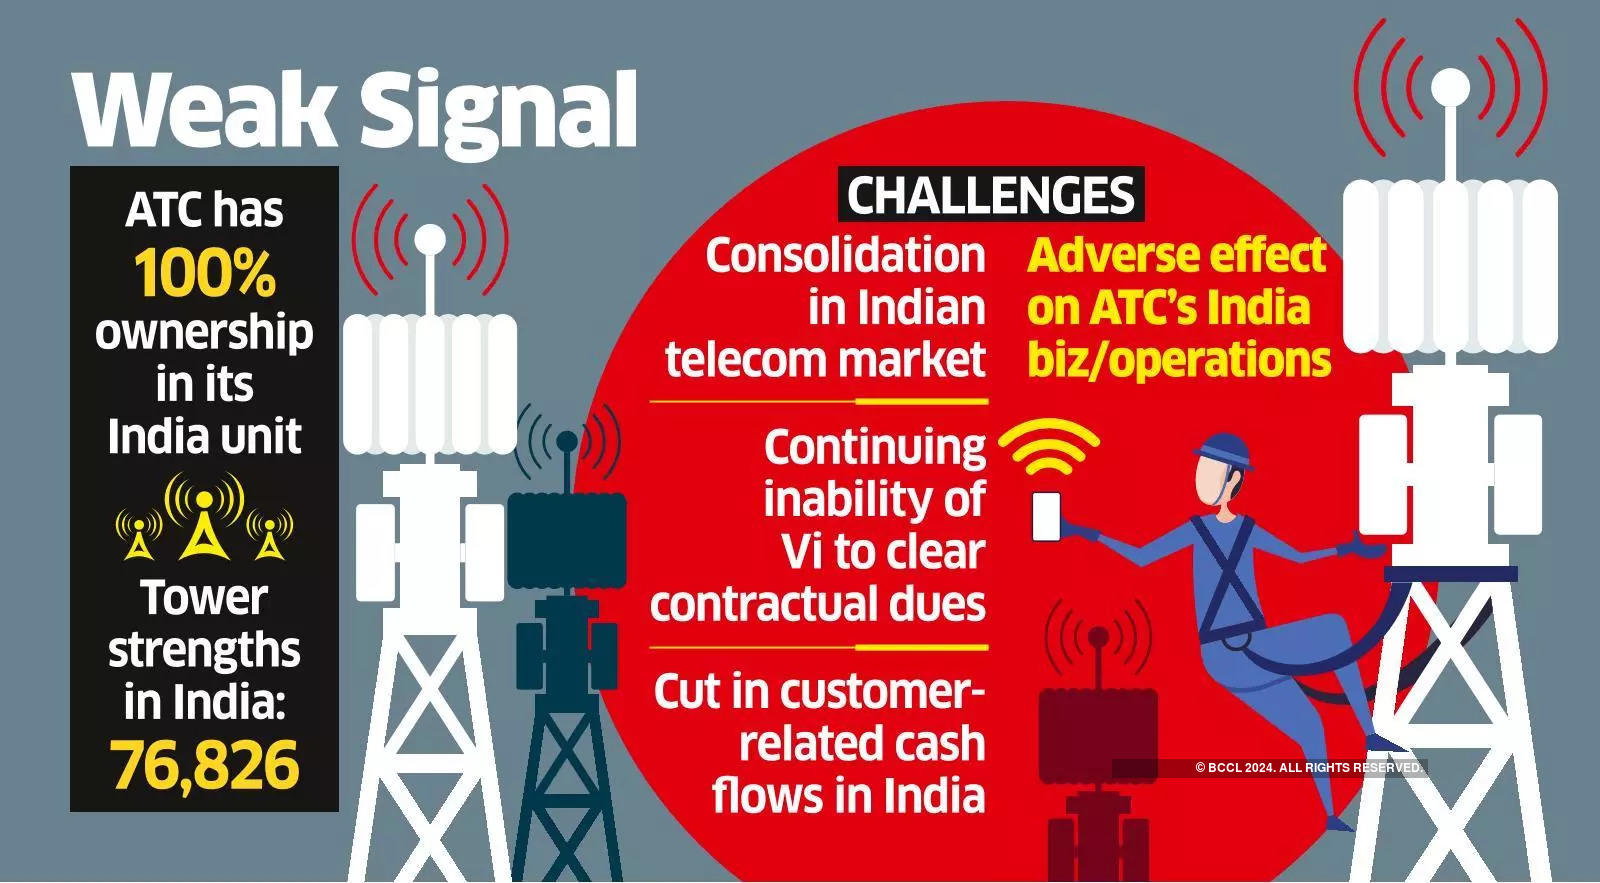 ATC plans stake sale in India operations, cites weak customer financials